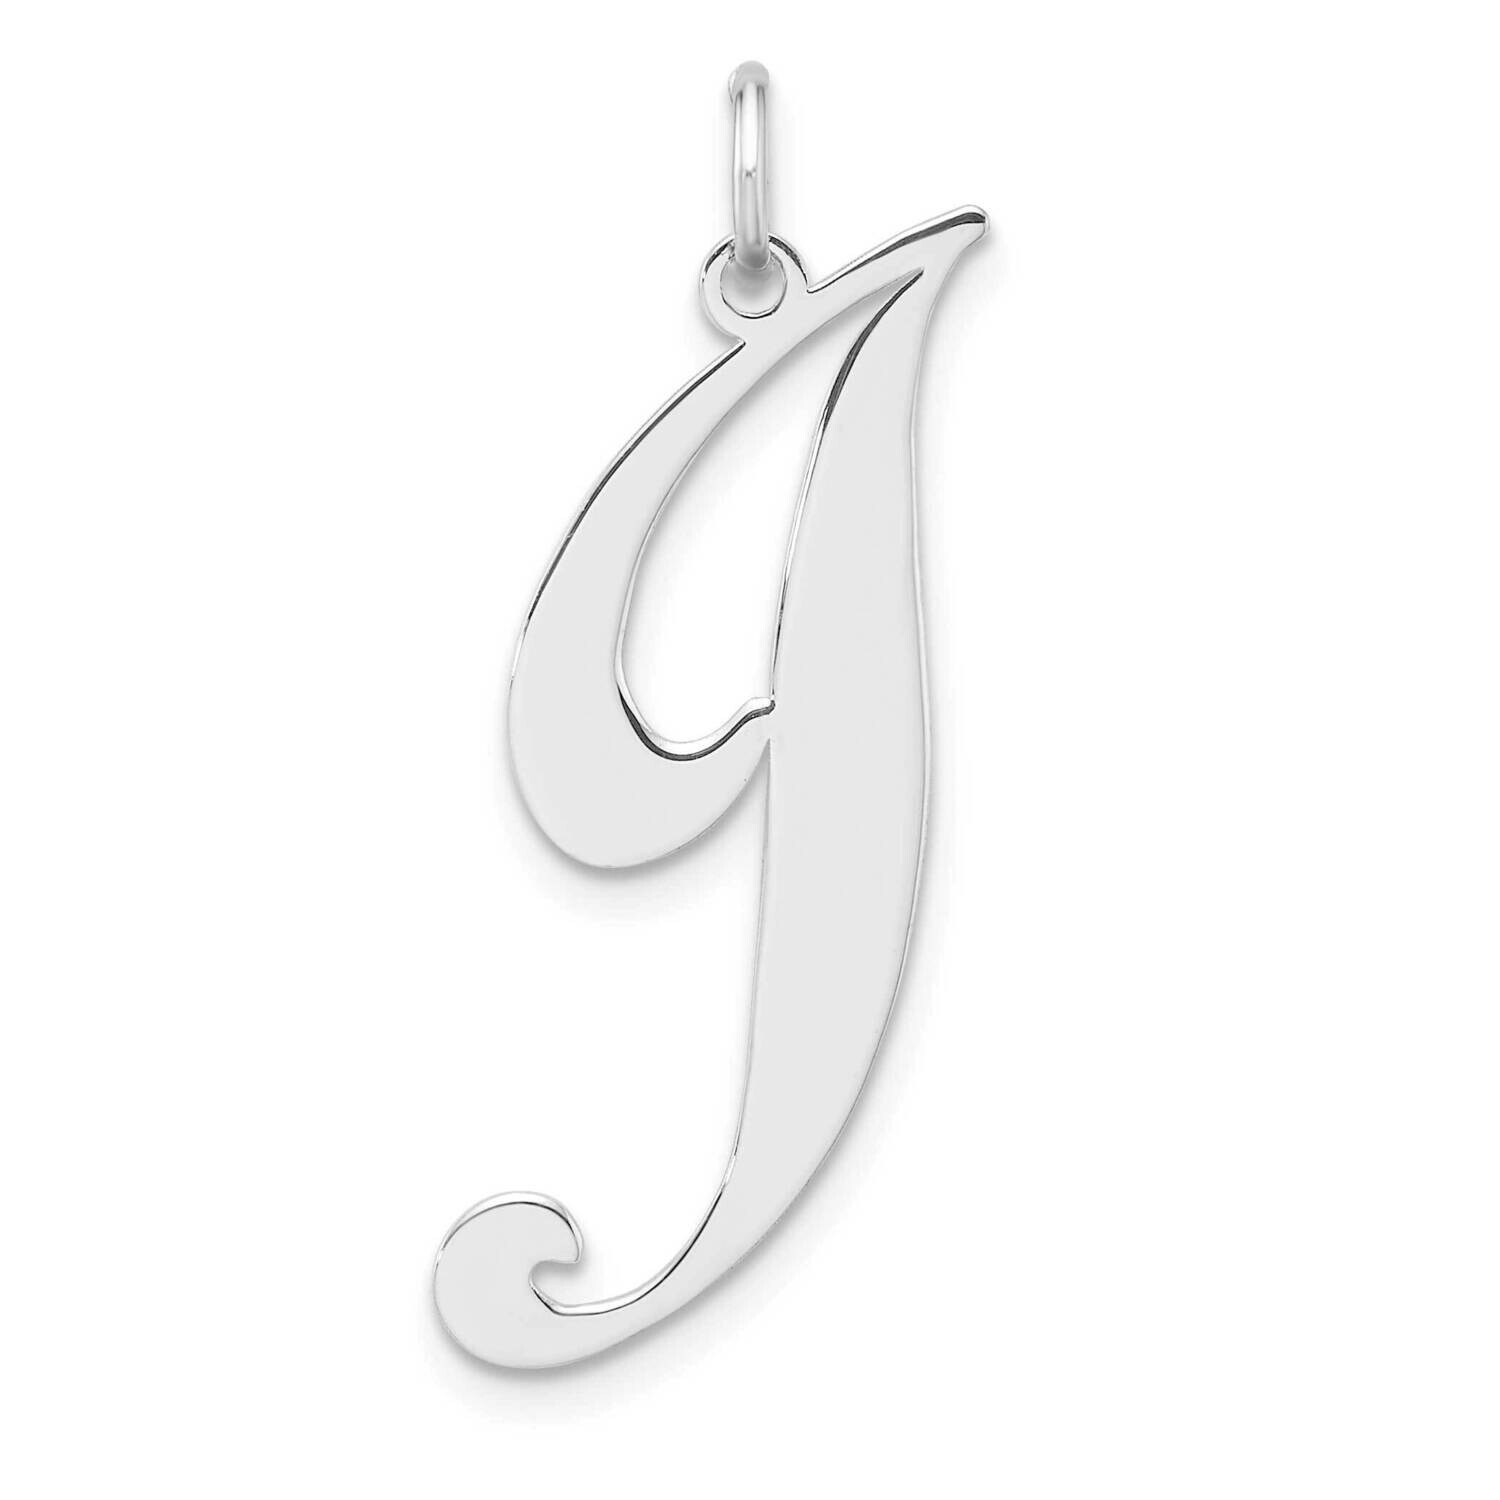 Large Fancy Script Letter J Initial Charm Sterling Silver Rhodium-Plated QC11254J